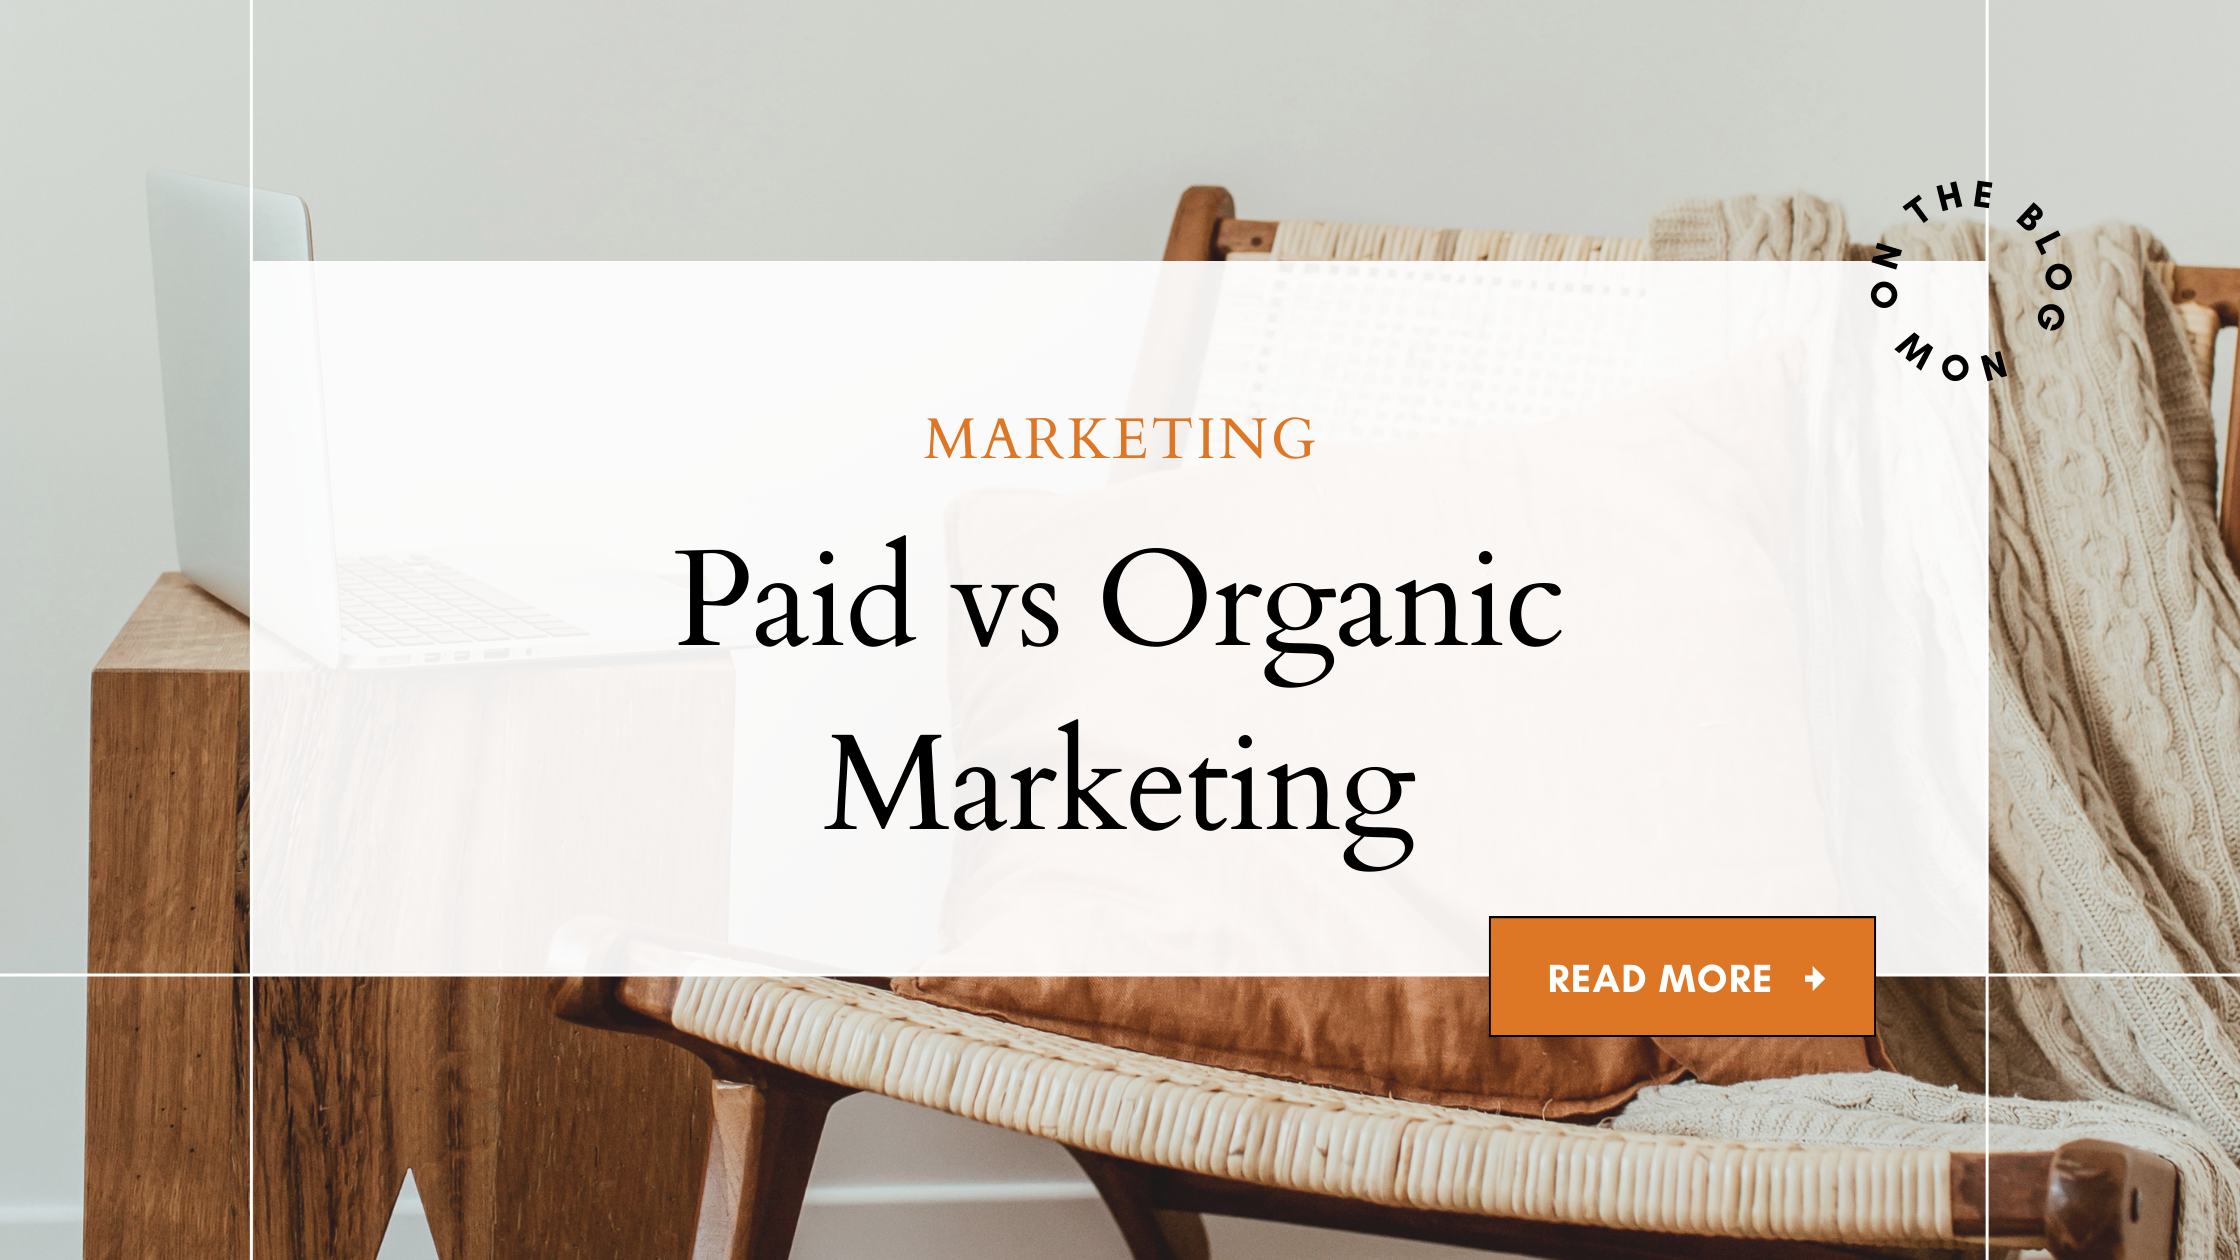 Paid vs organic marketing for your photography business